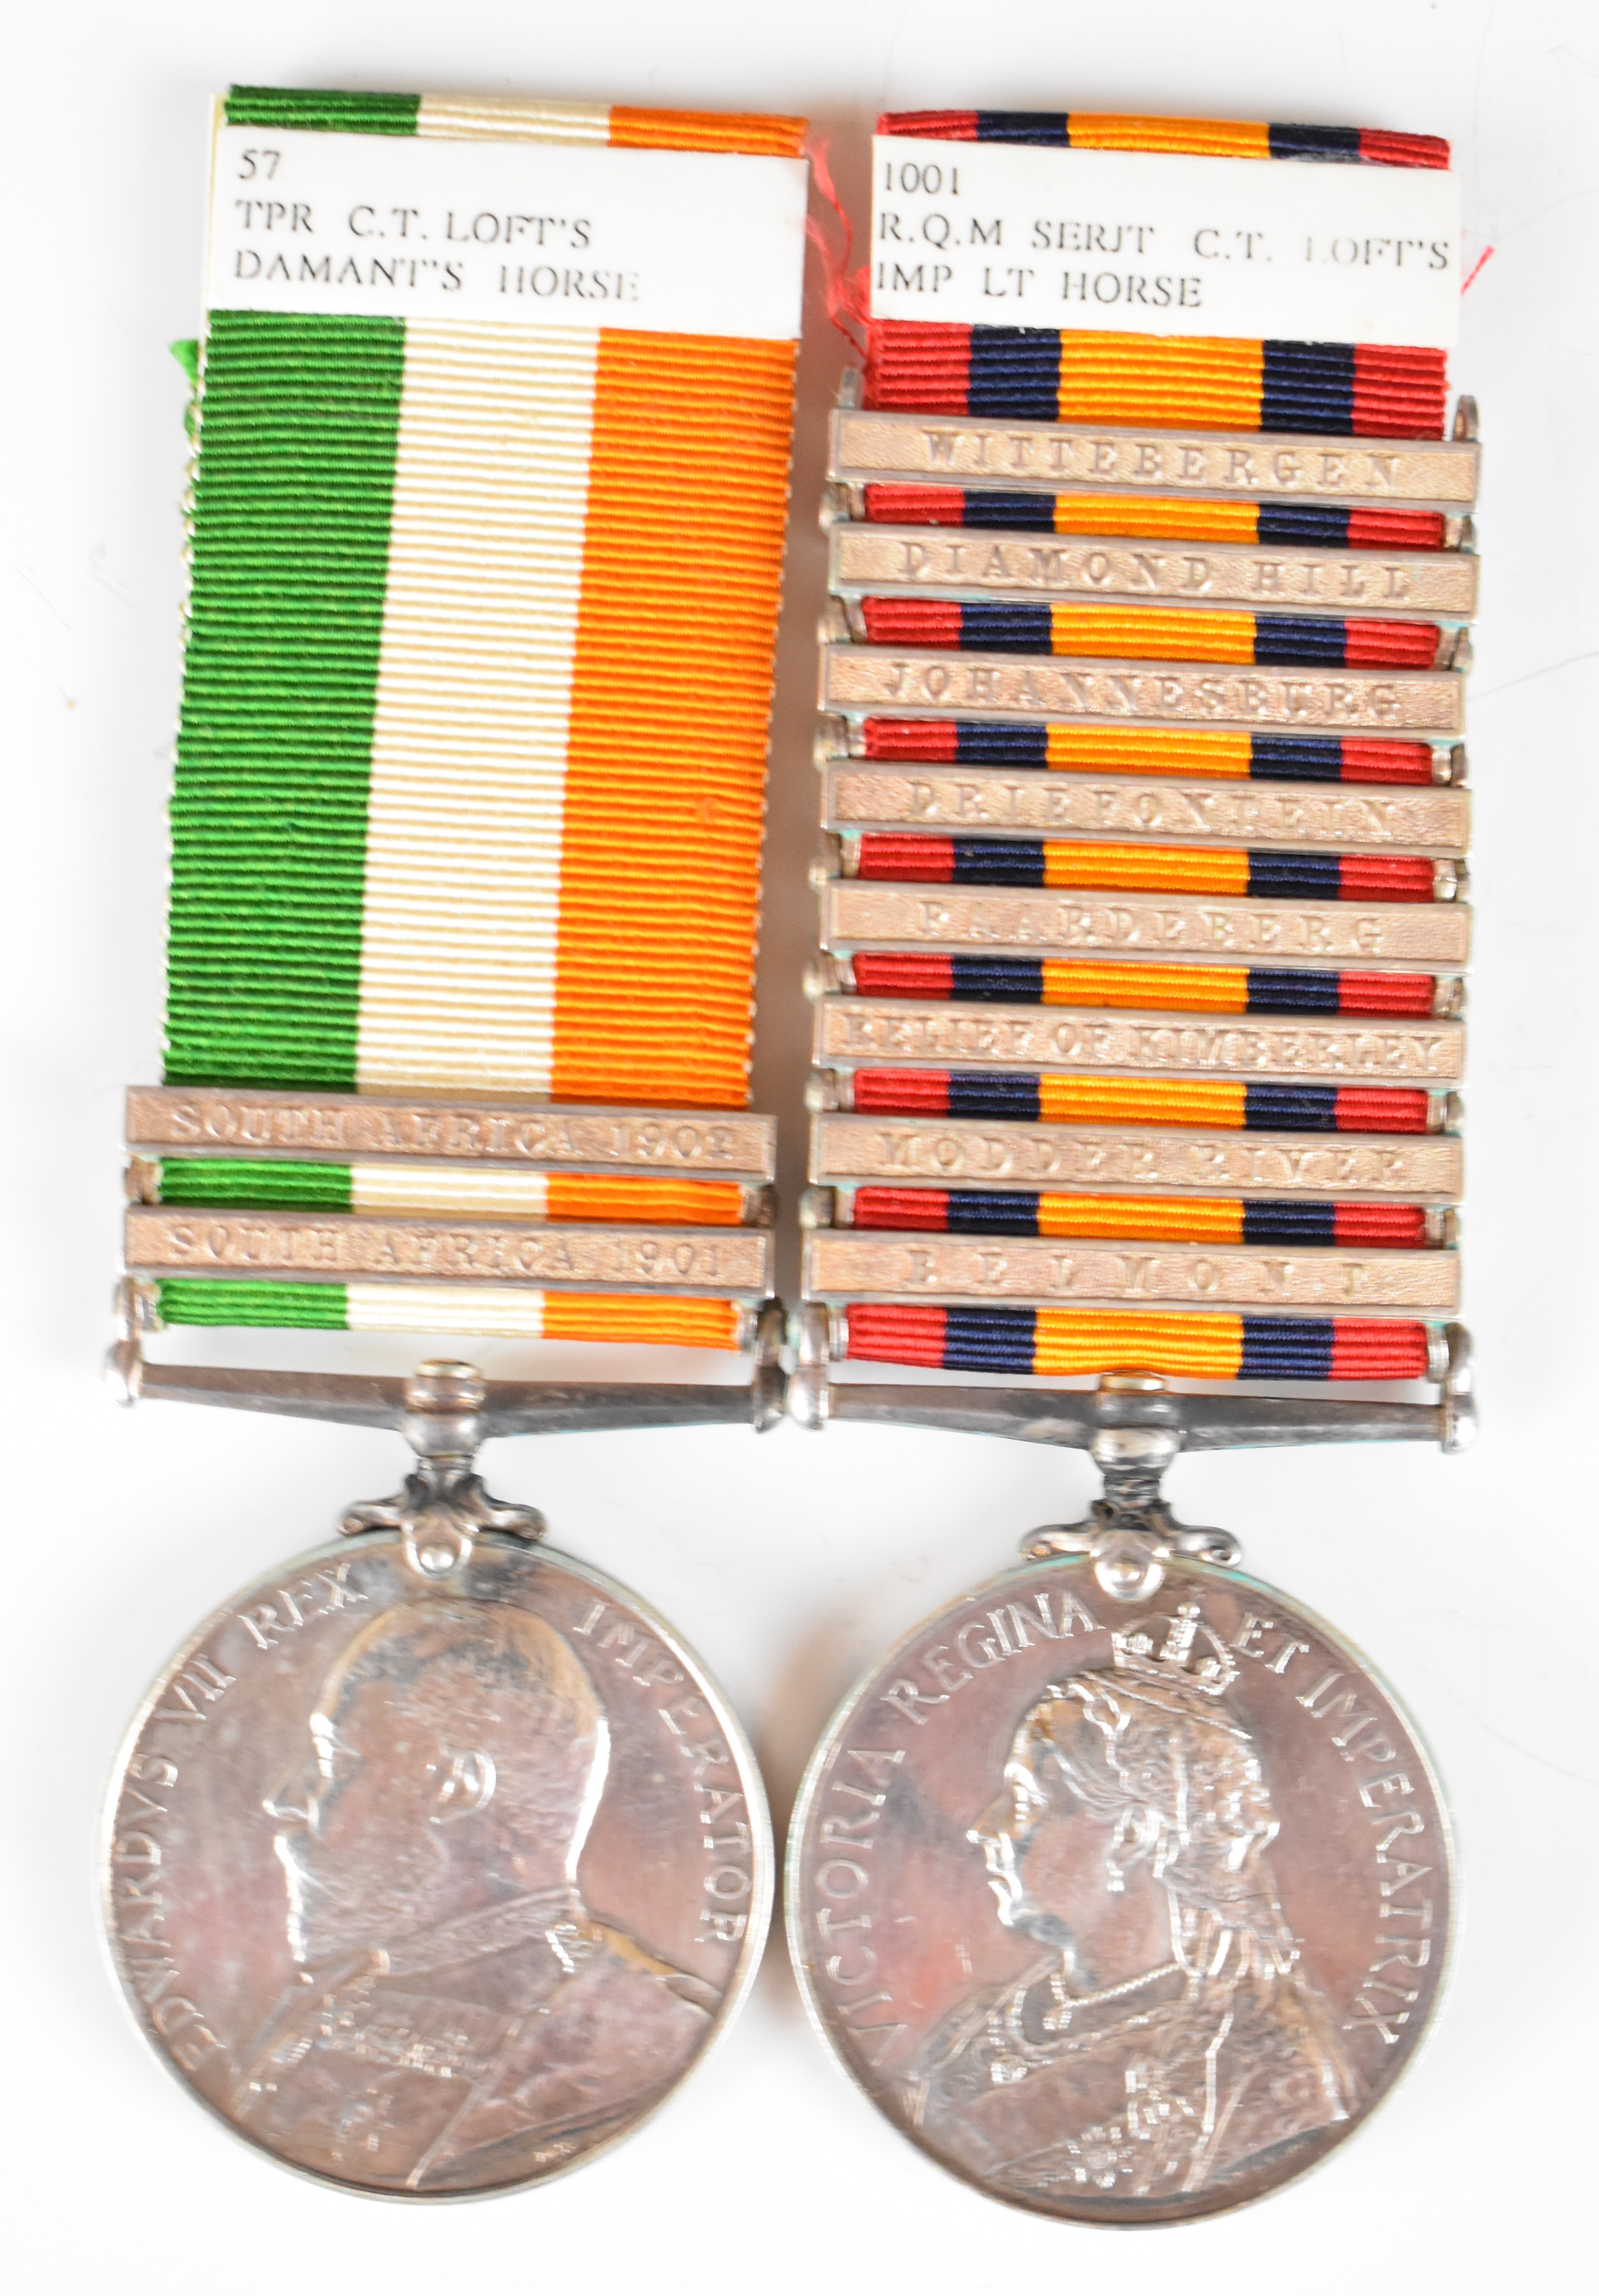 Queen's South Africa Medal with eight clasps for Belmont, Modder River, Relief of Kimberley, - Image 11 of 20